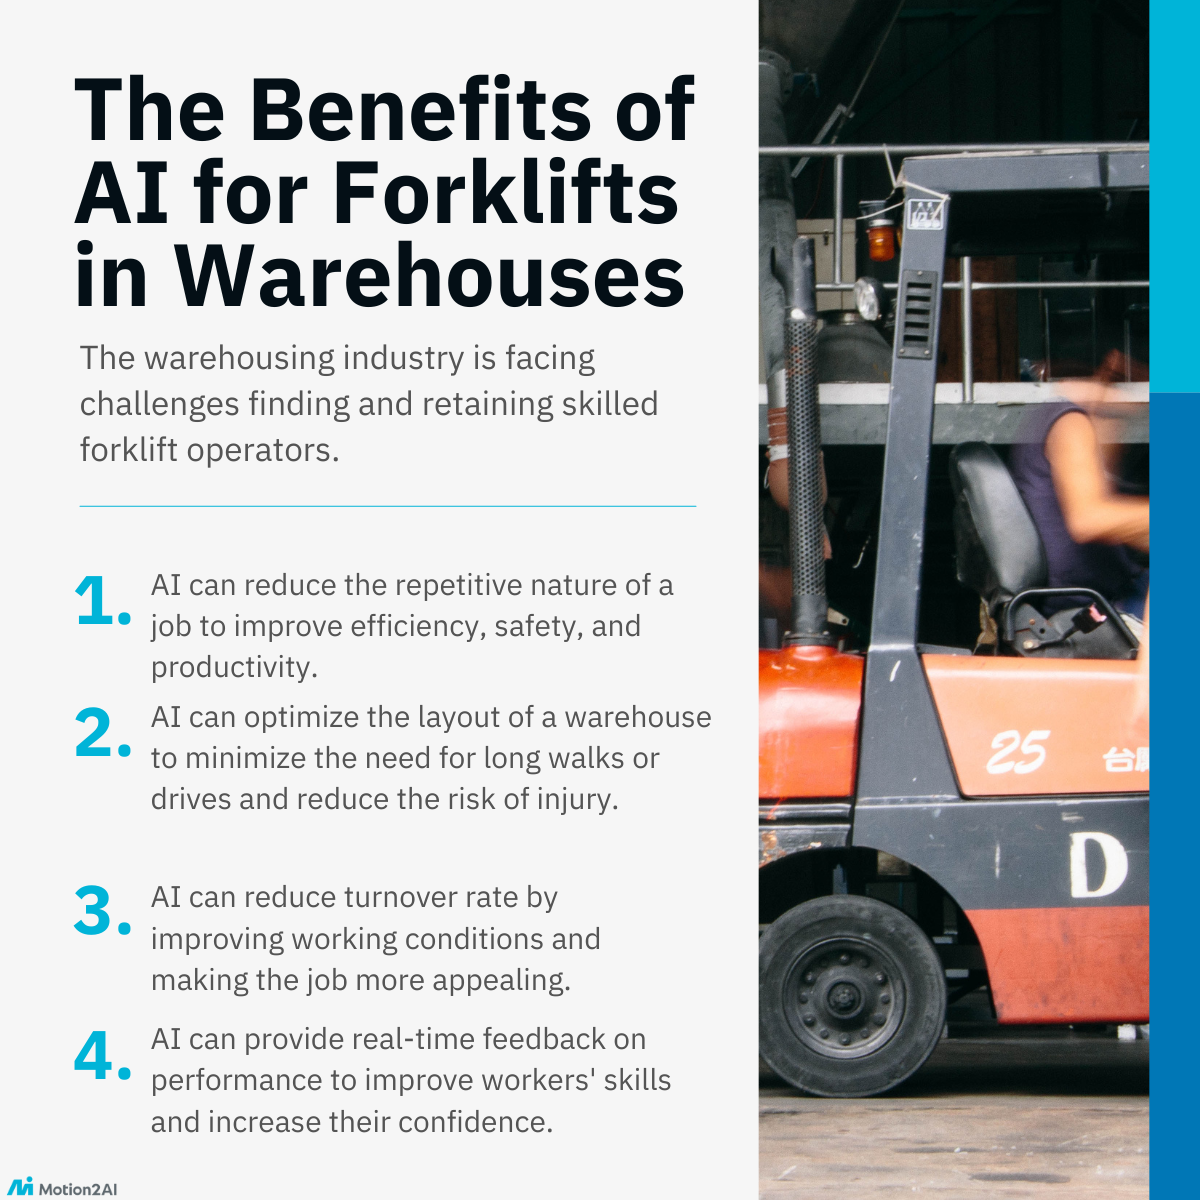 The Benefits of AI for Forklifts in Warehouses